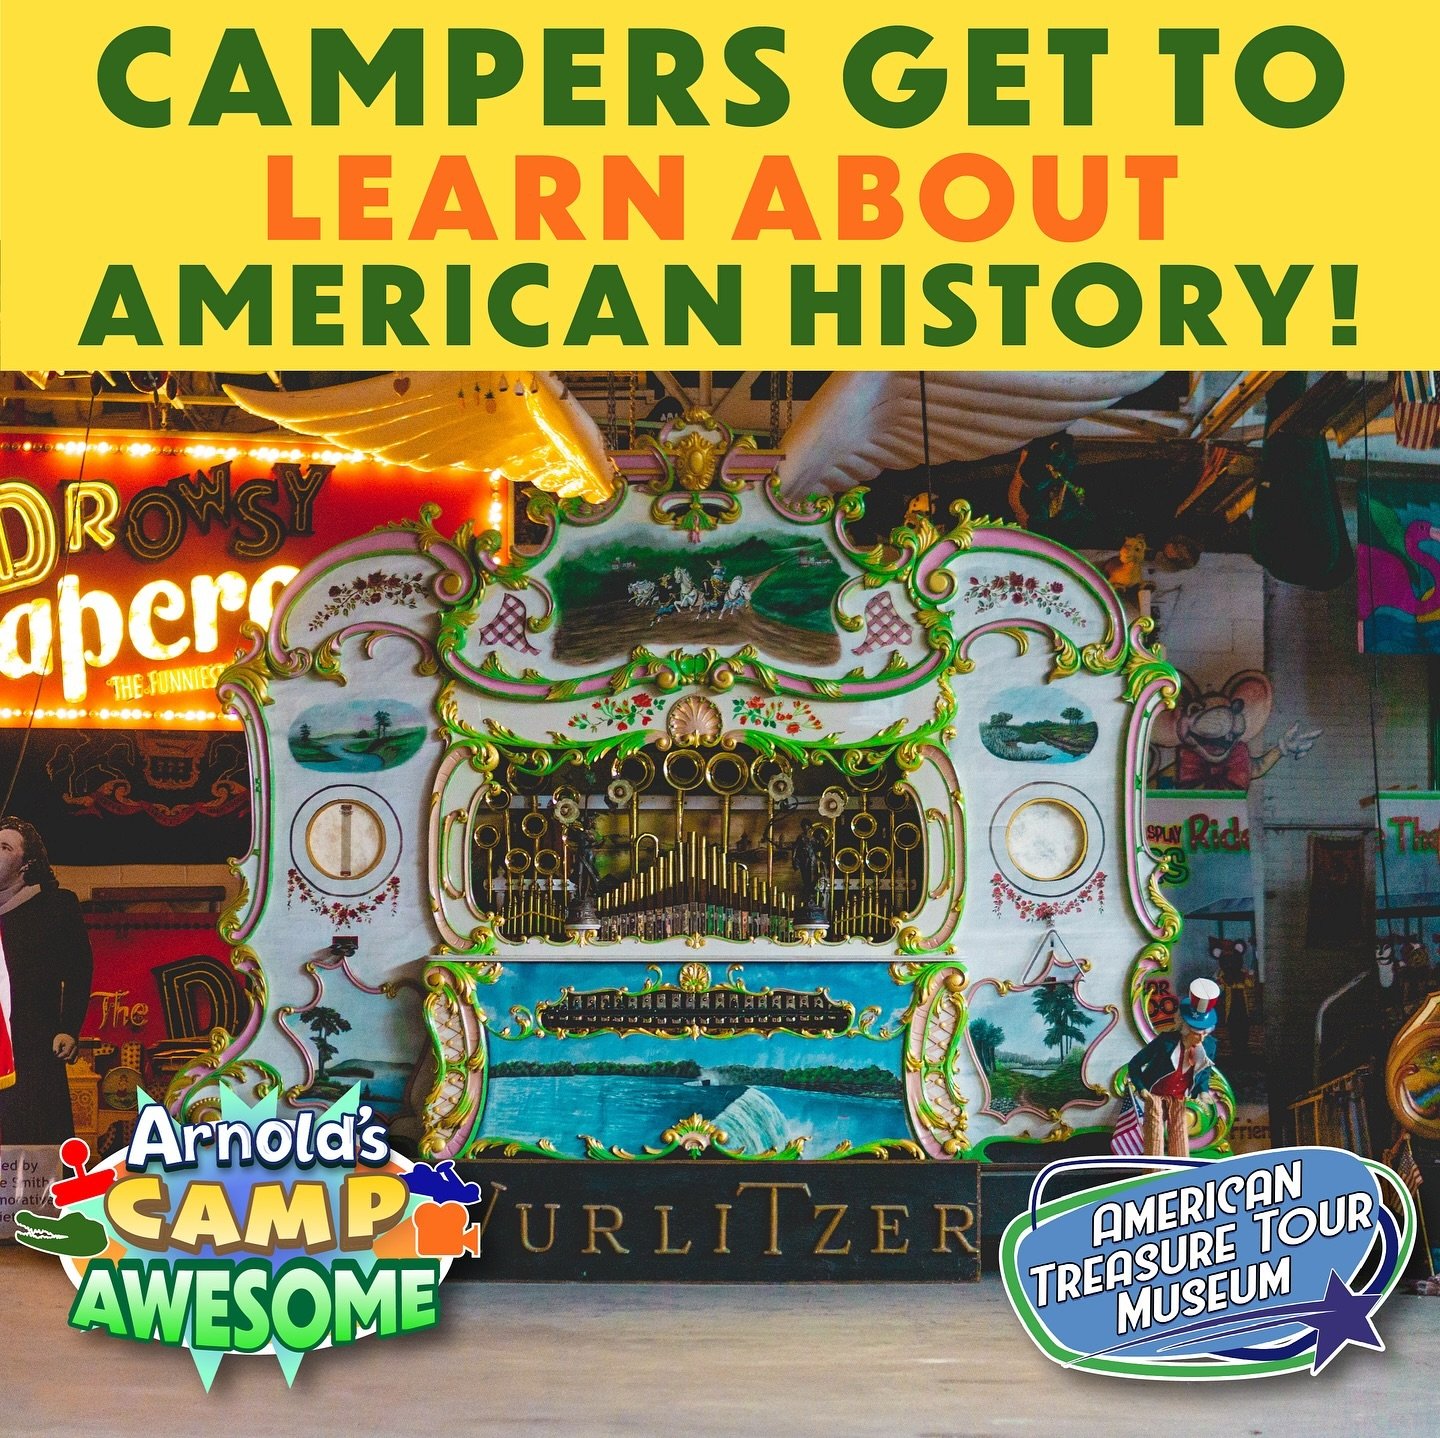 ⛺️Campers at Arnolds Camp Awesome @americantreasuretour get to experience trips to the 🇺🇸 American Treasure Tour Museum 🇺🇸 for a unique educational experience!

🤪This fun &amp; eclectic museum is a one of a kind experience featuring curios such 